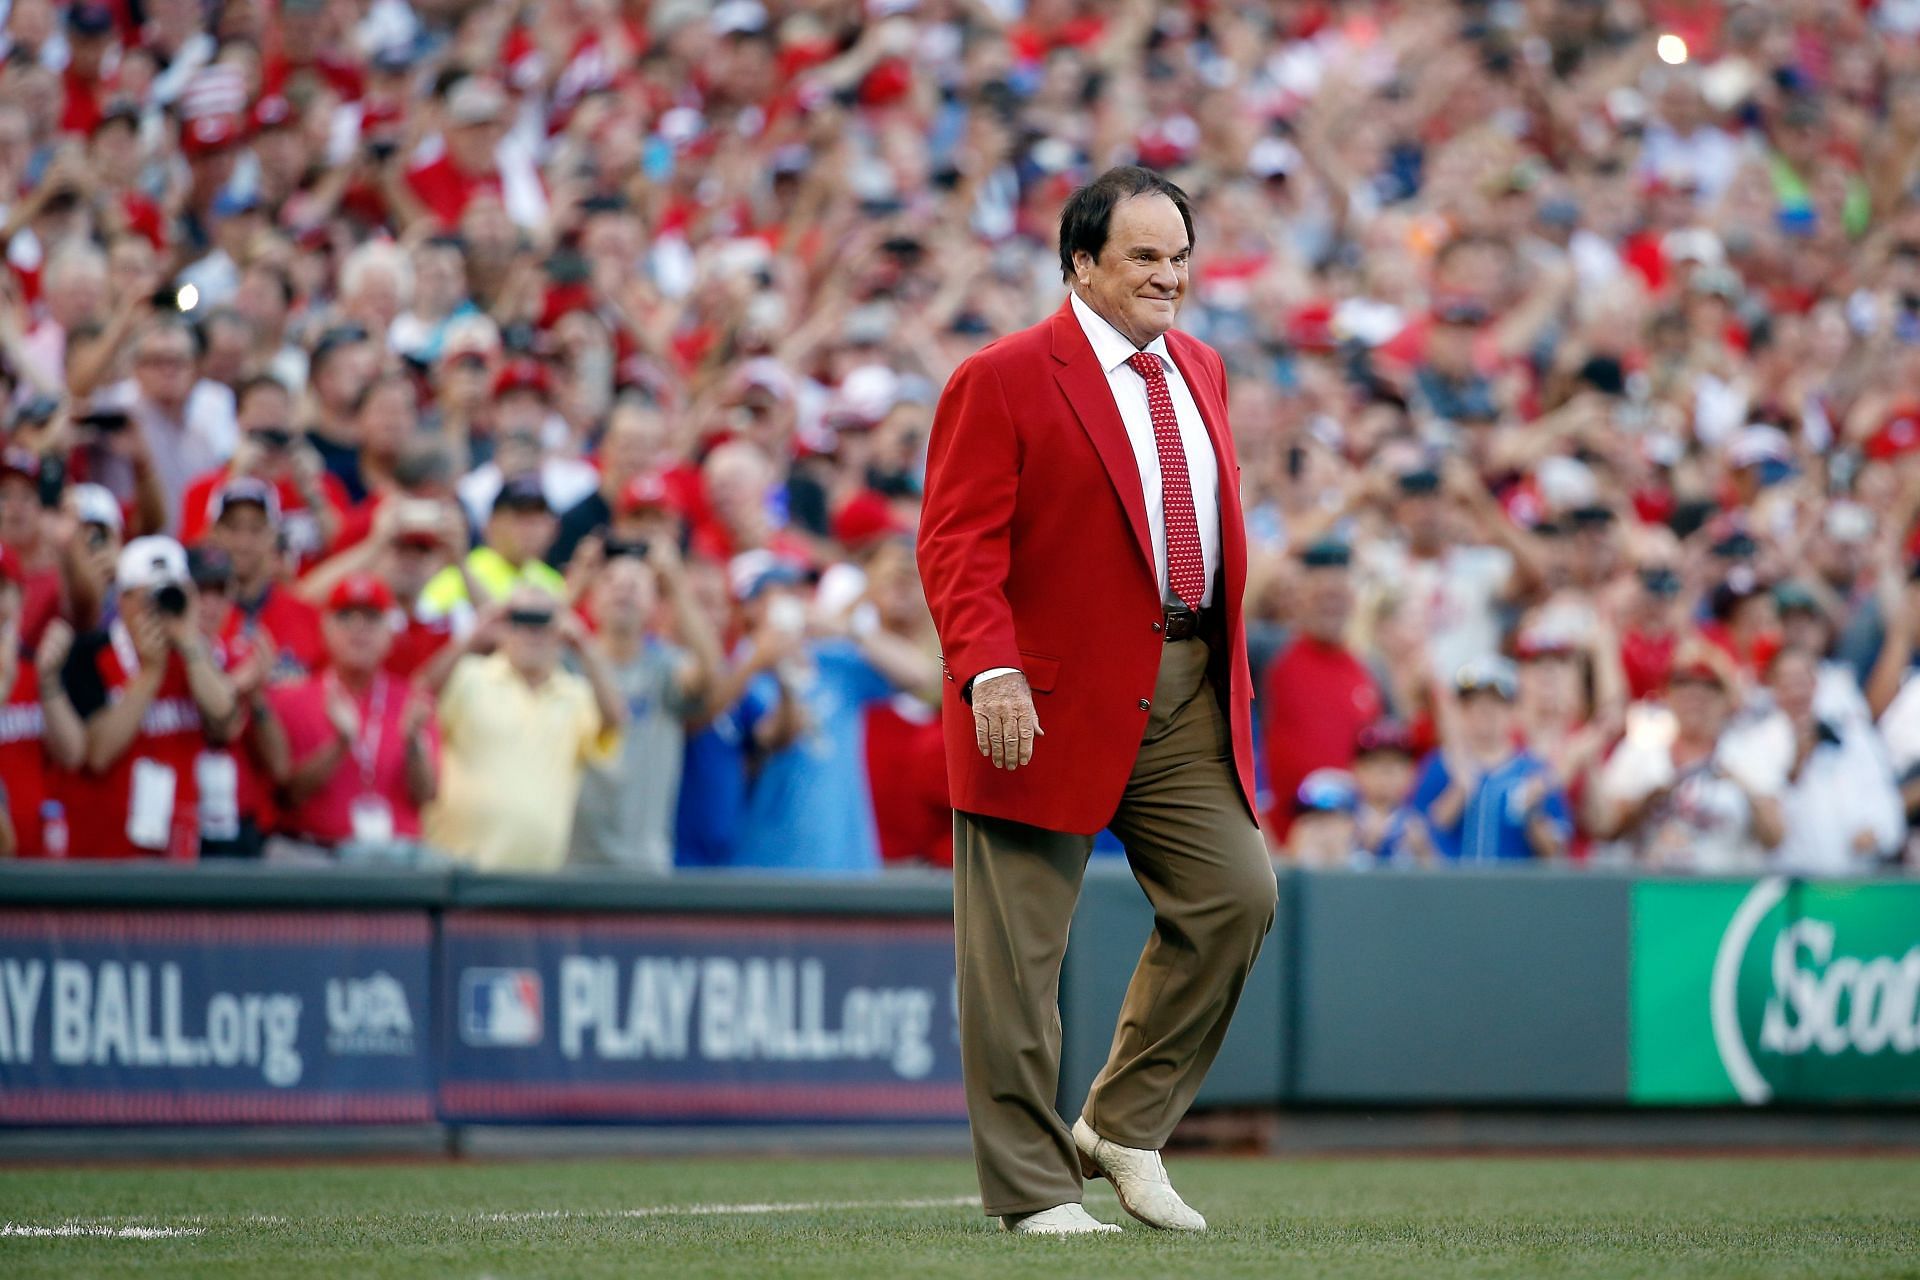 Pete Rose is not in the Hall of Fame